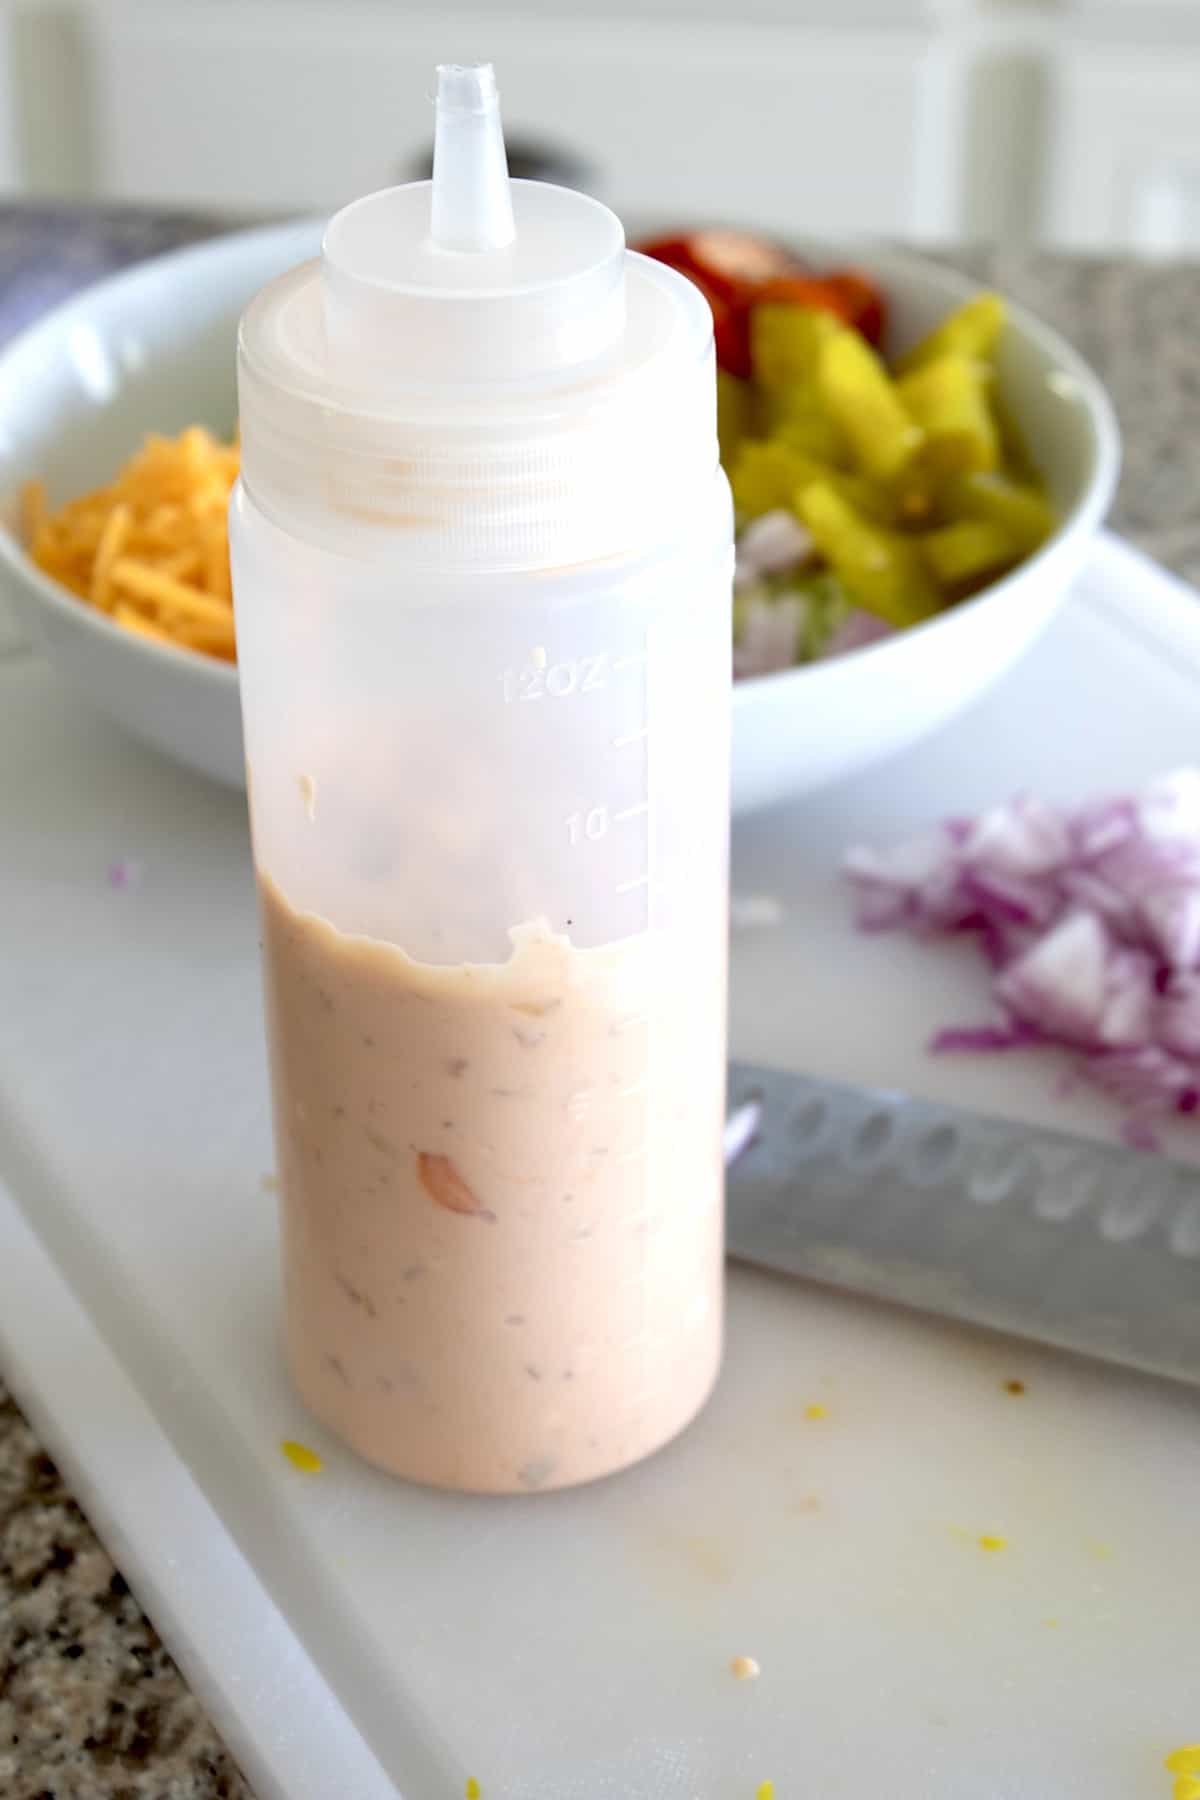 Big Mac style dressing in a squeeze bottle